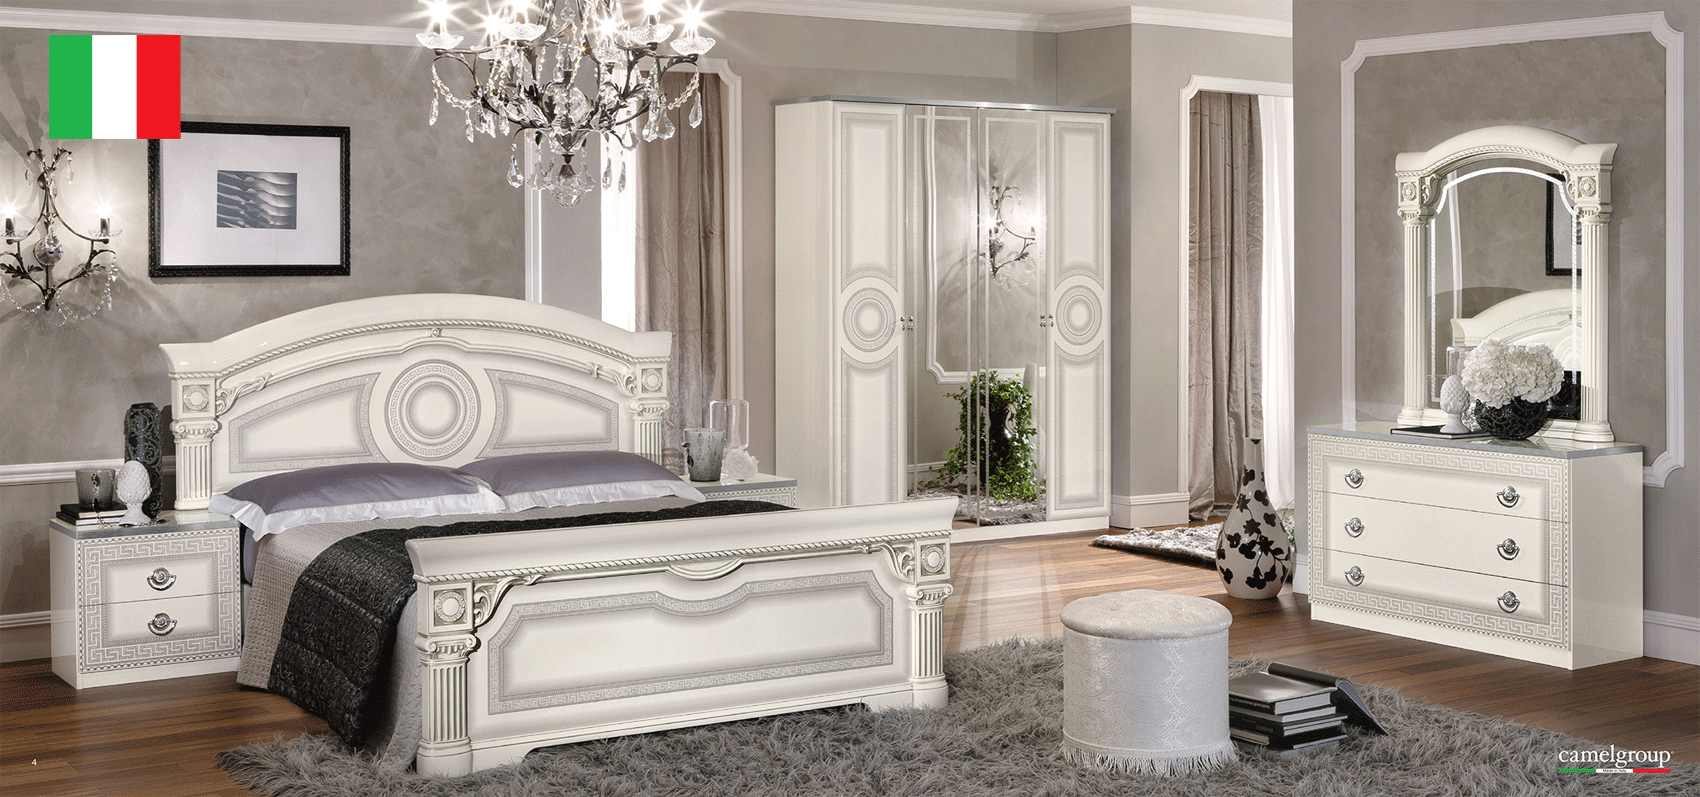 Bedroom Furniture Dressers and Chests Aida Bedroom, White w/Silver, Camelgroup Italy